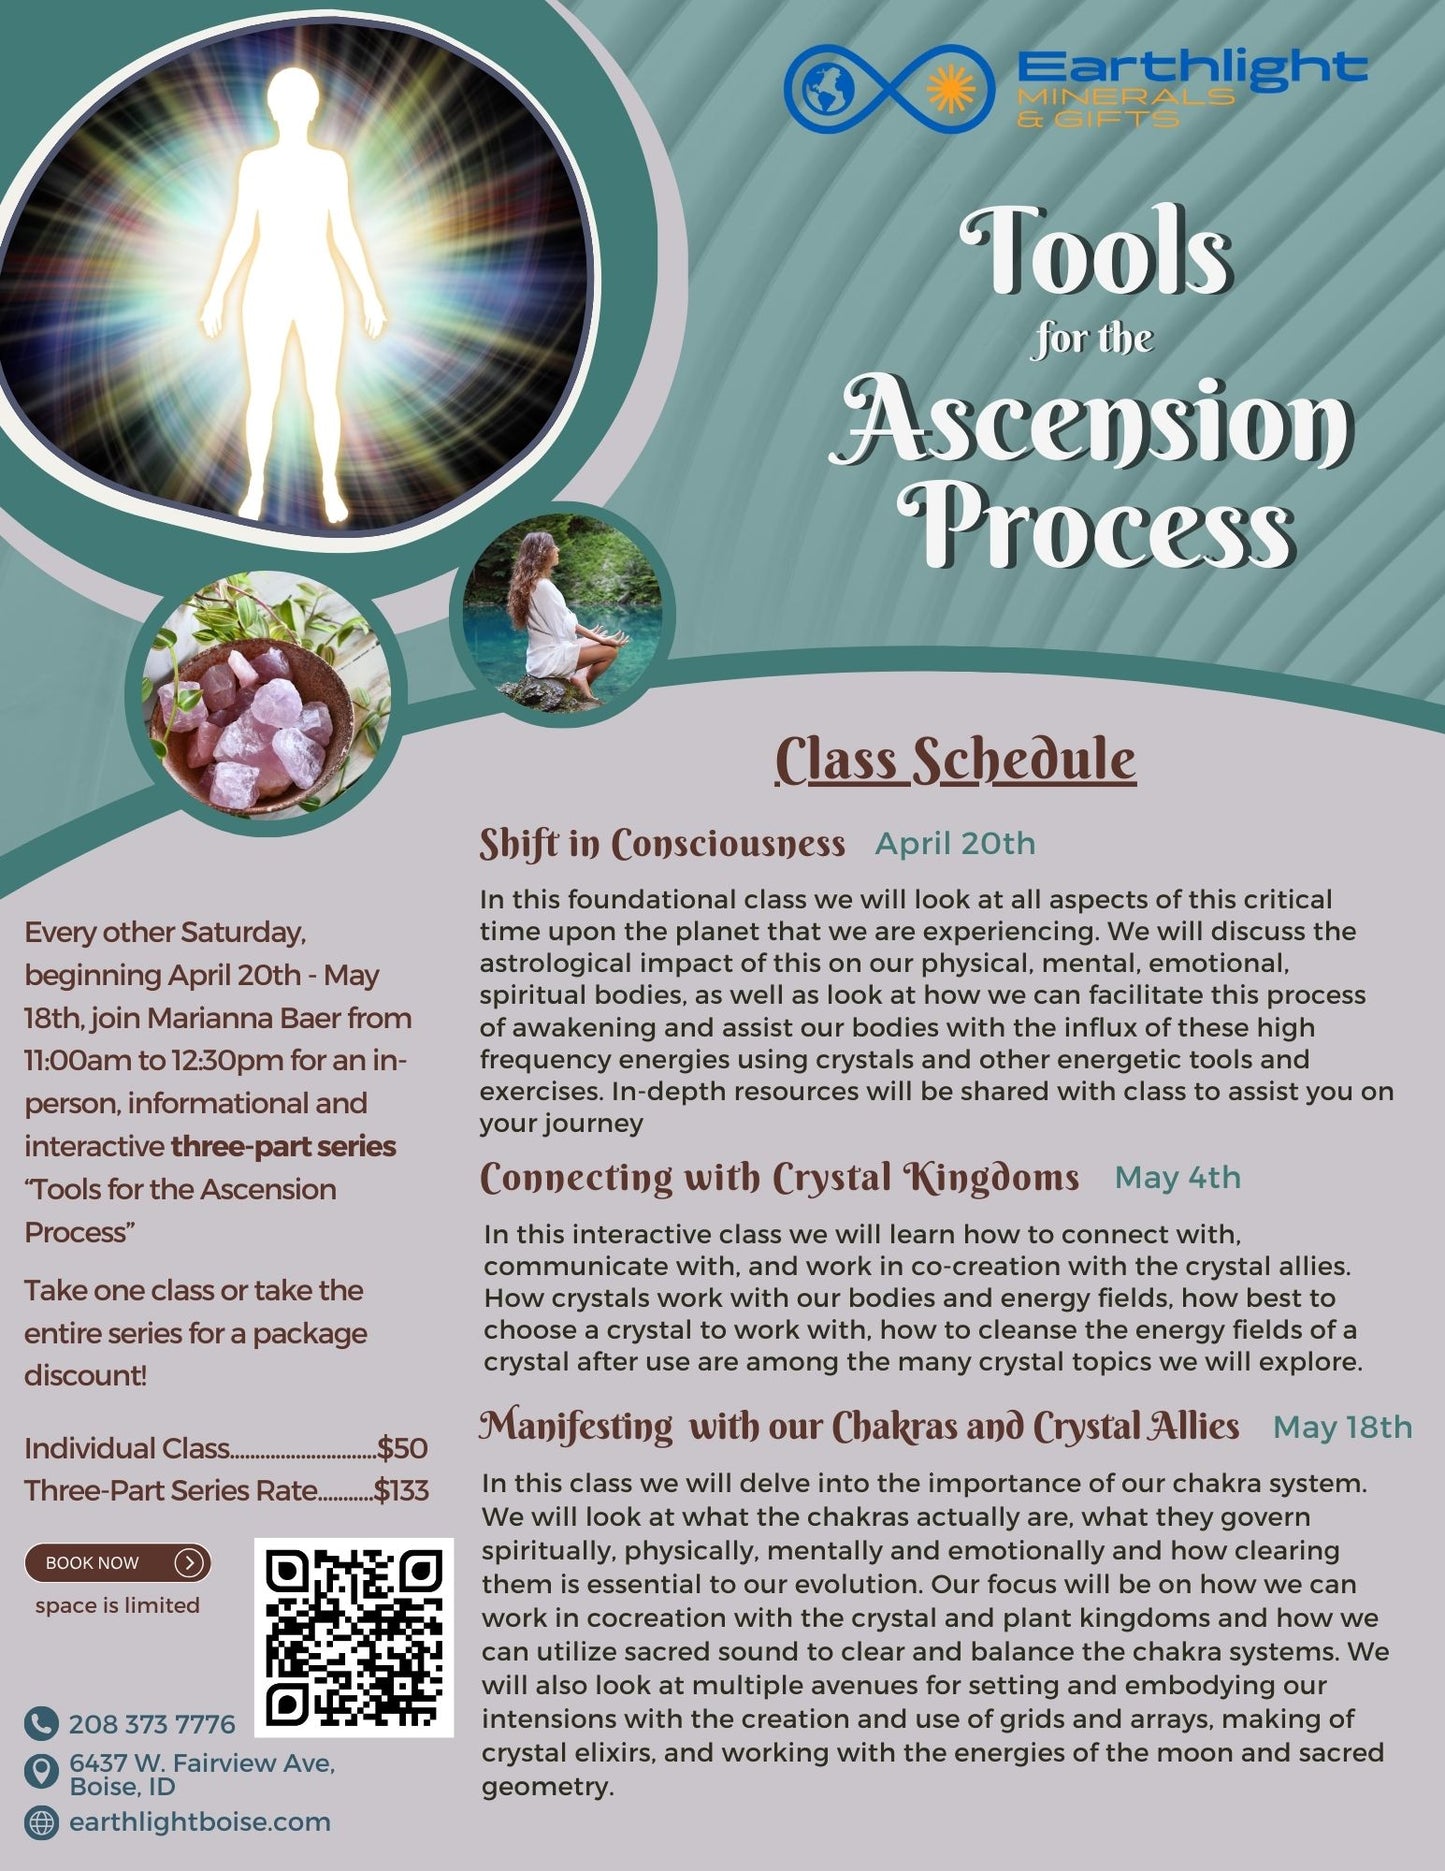 Tools for the Ascension Process Series